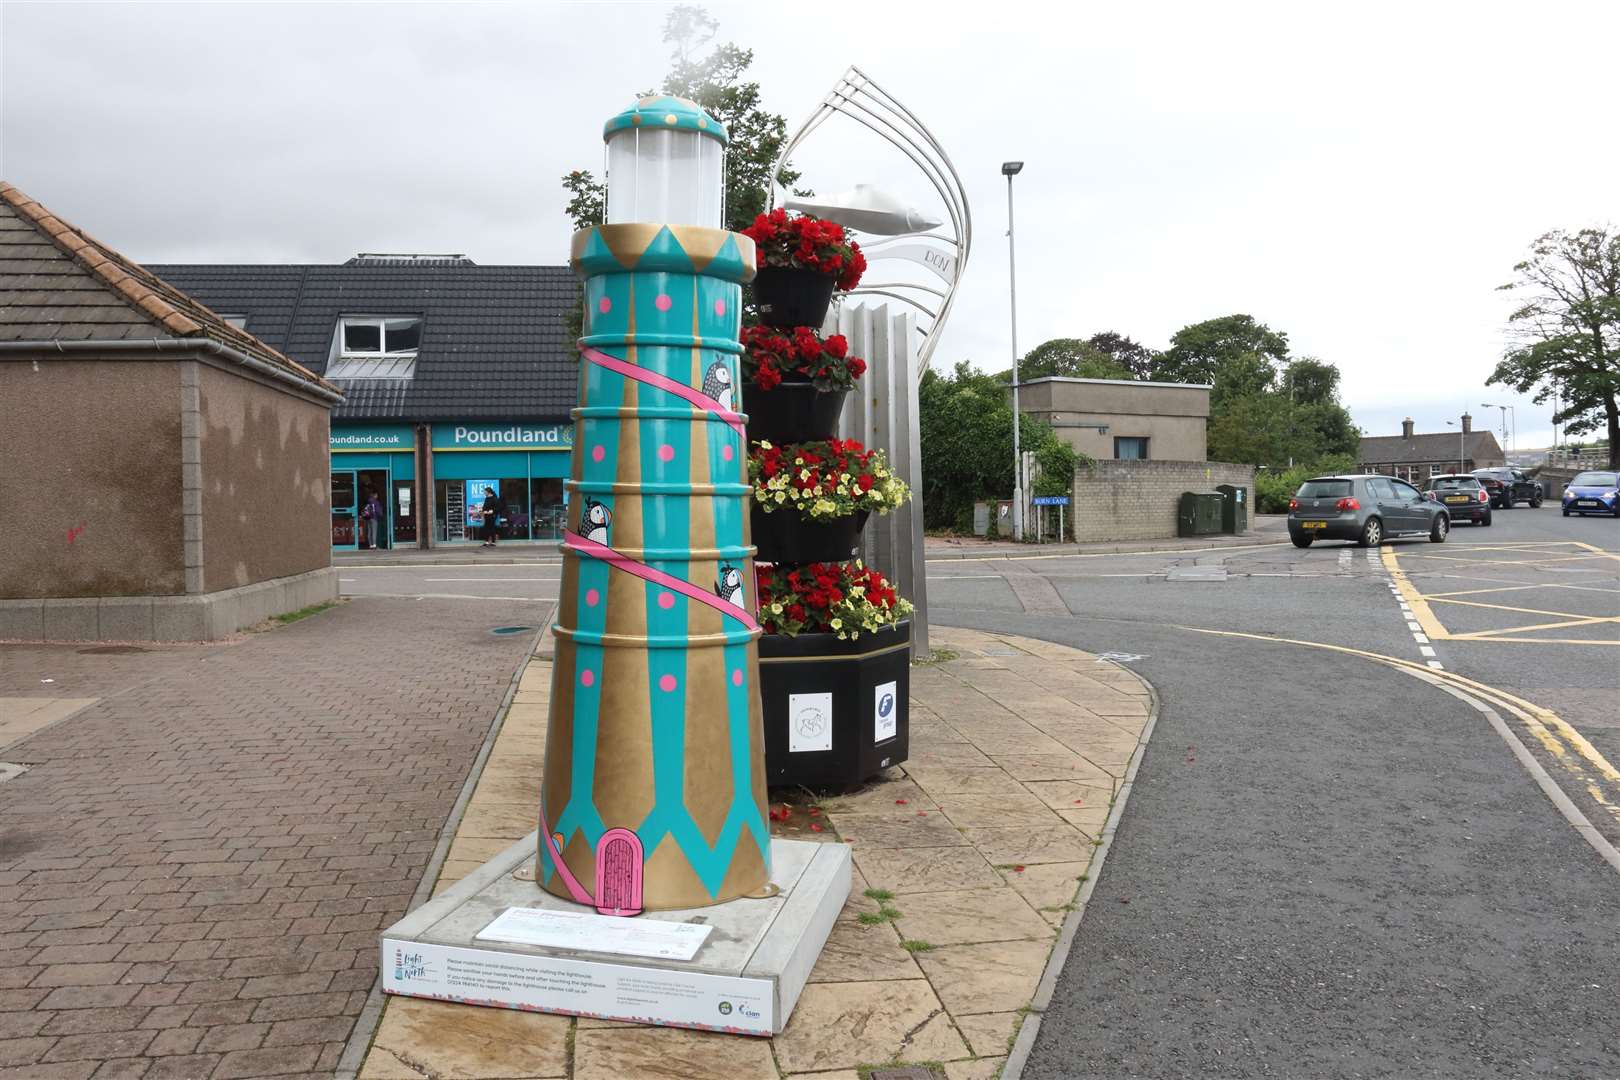 Puffin Playground sold for £3600.